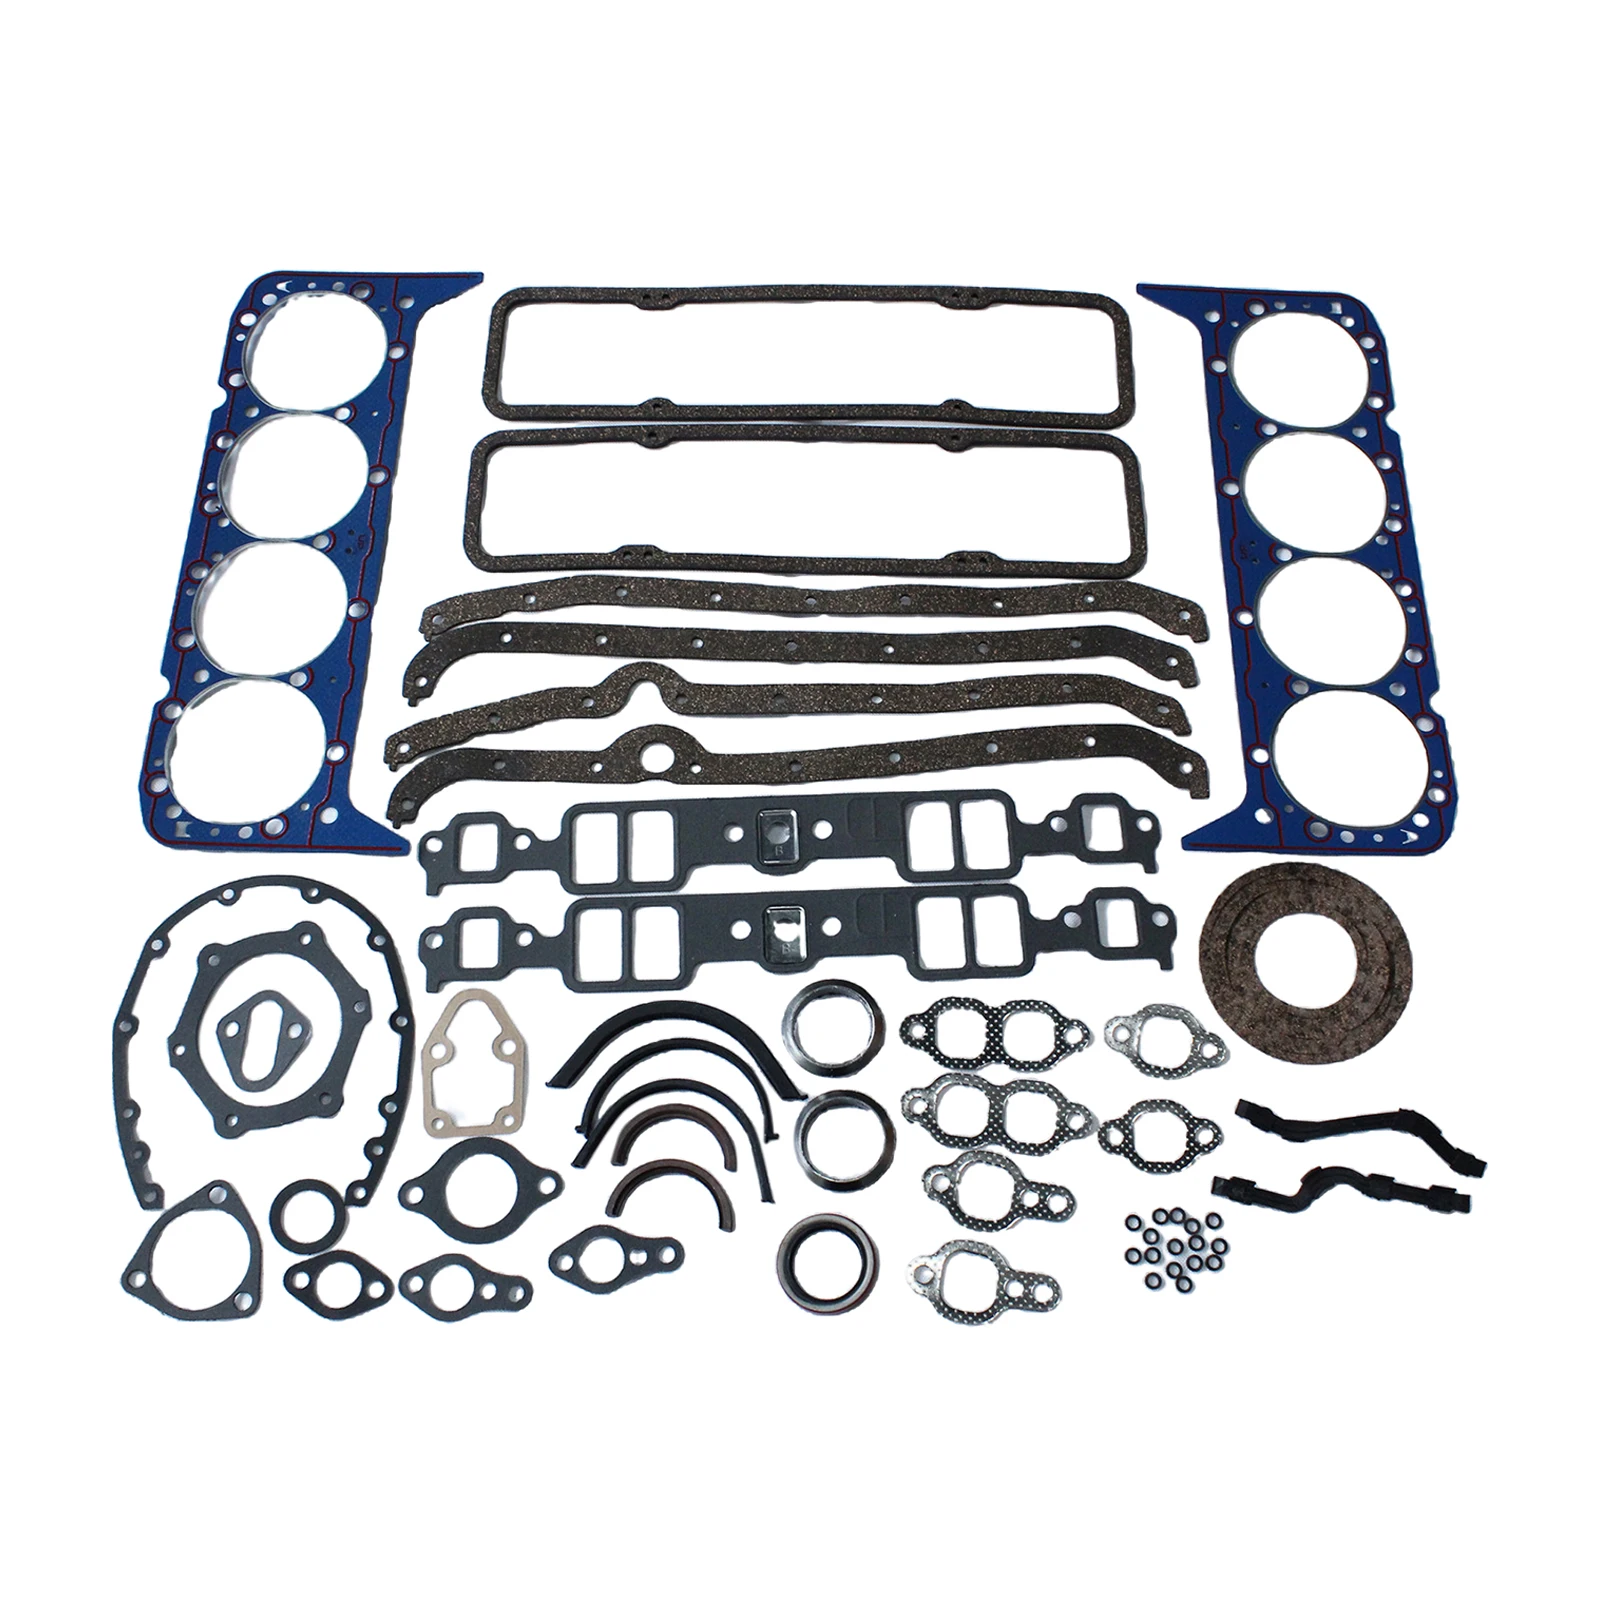 Engine Overhaul Complete Gaskets Set for Small Block 283 302